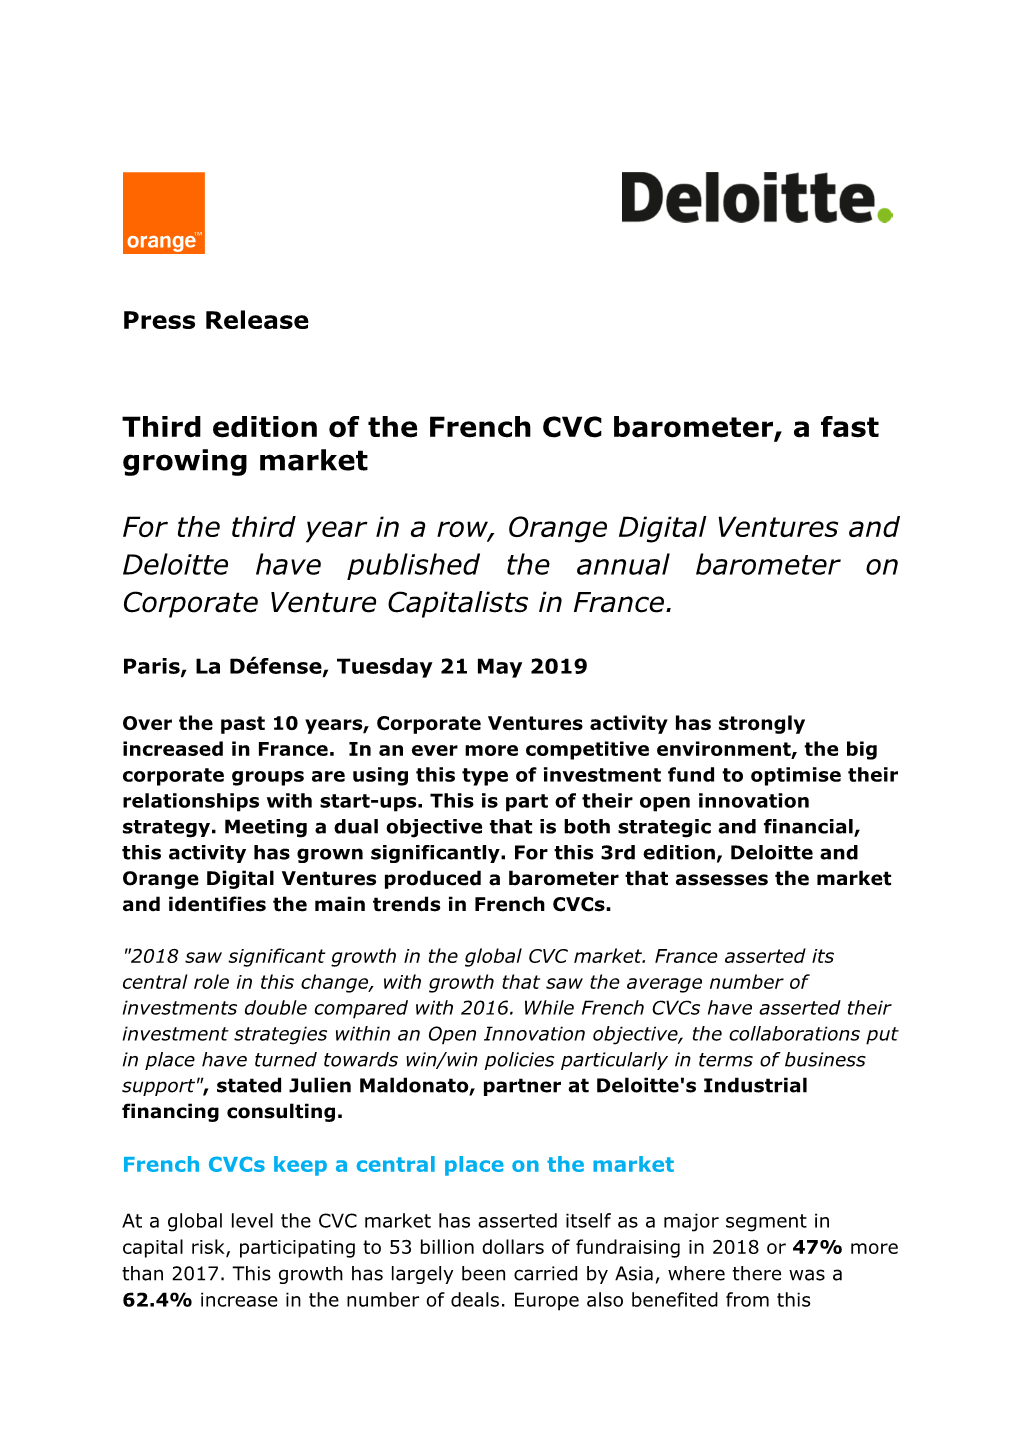 Third Edition of the French CVC Barometer, a Fast Growing Market